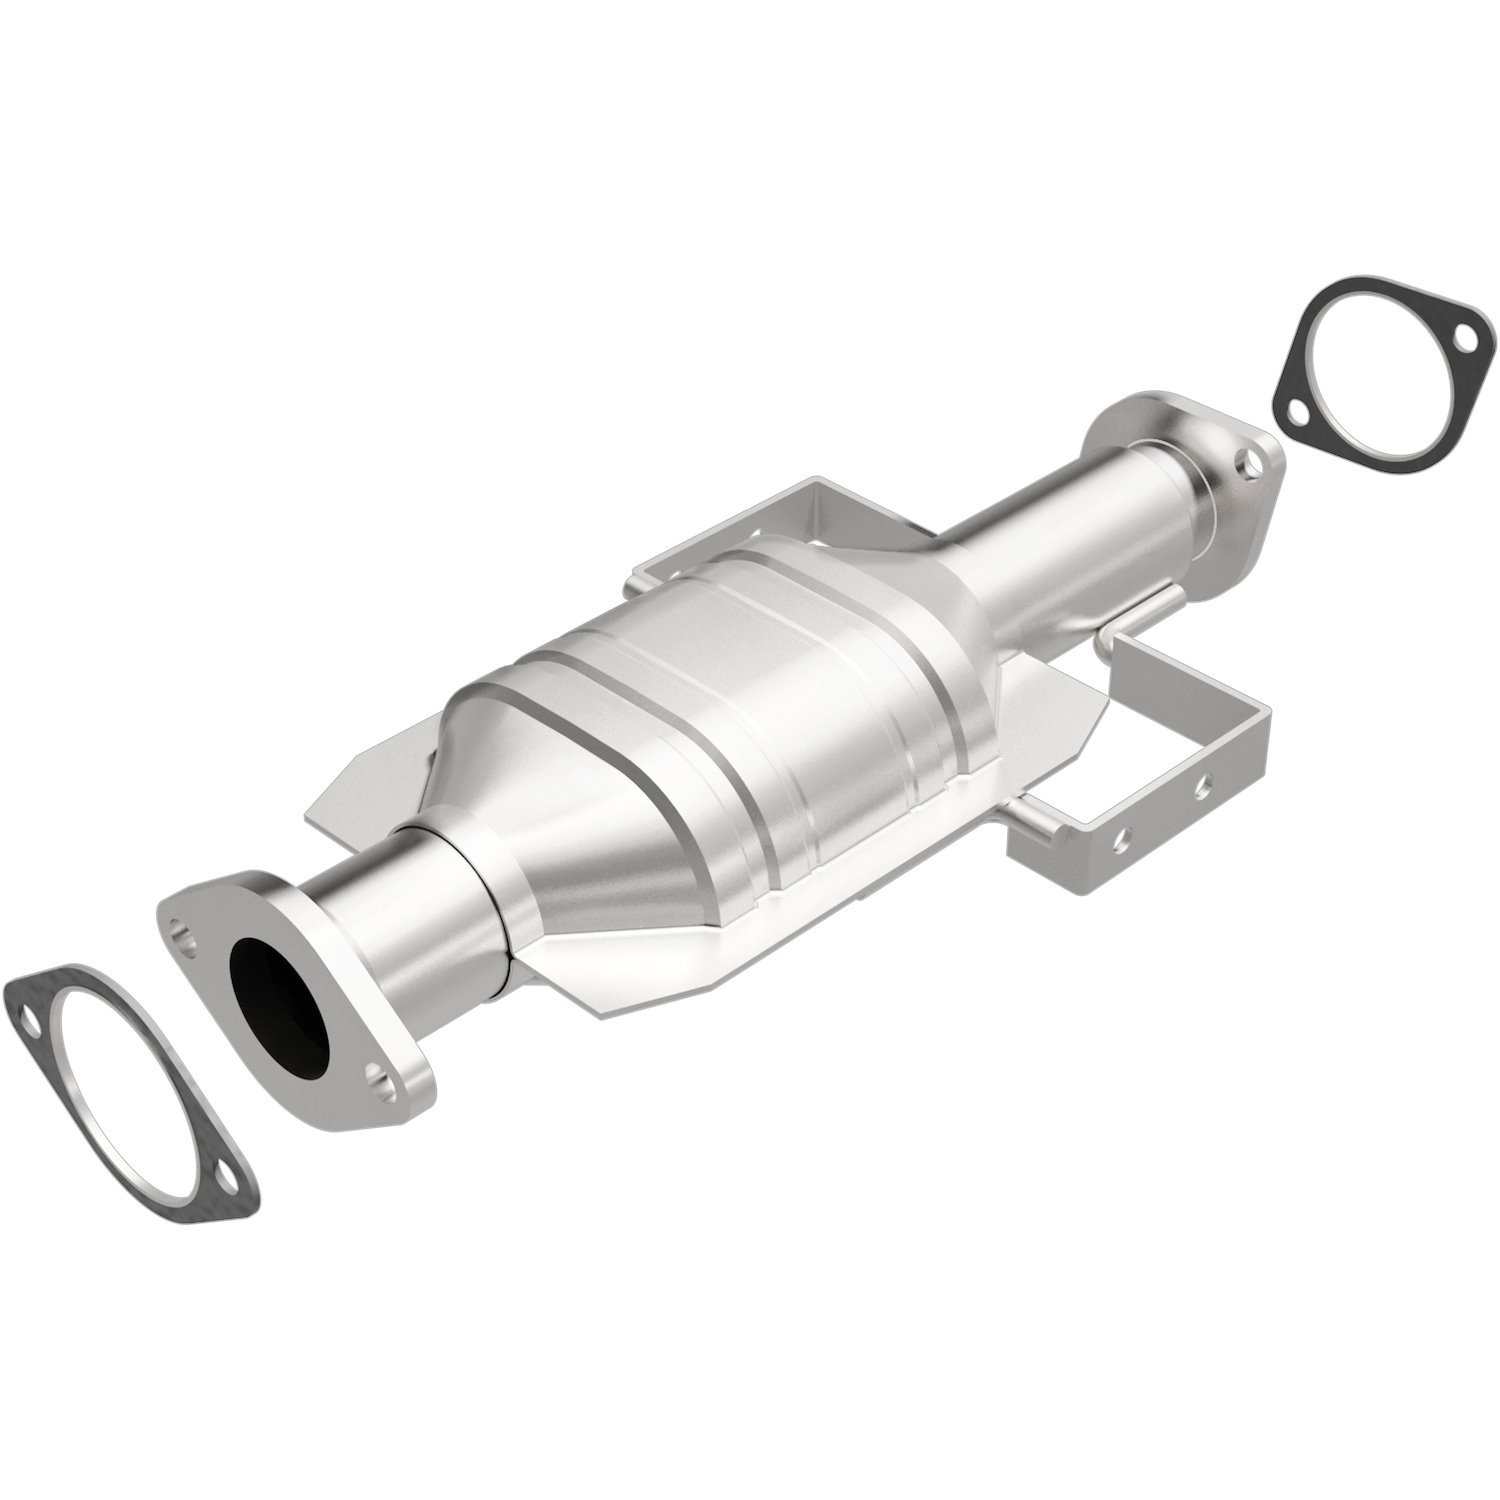 California Grade CARB Compliant Direct-Fit Catalytic Converter 338243